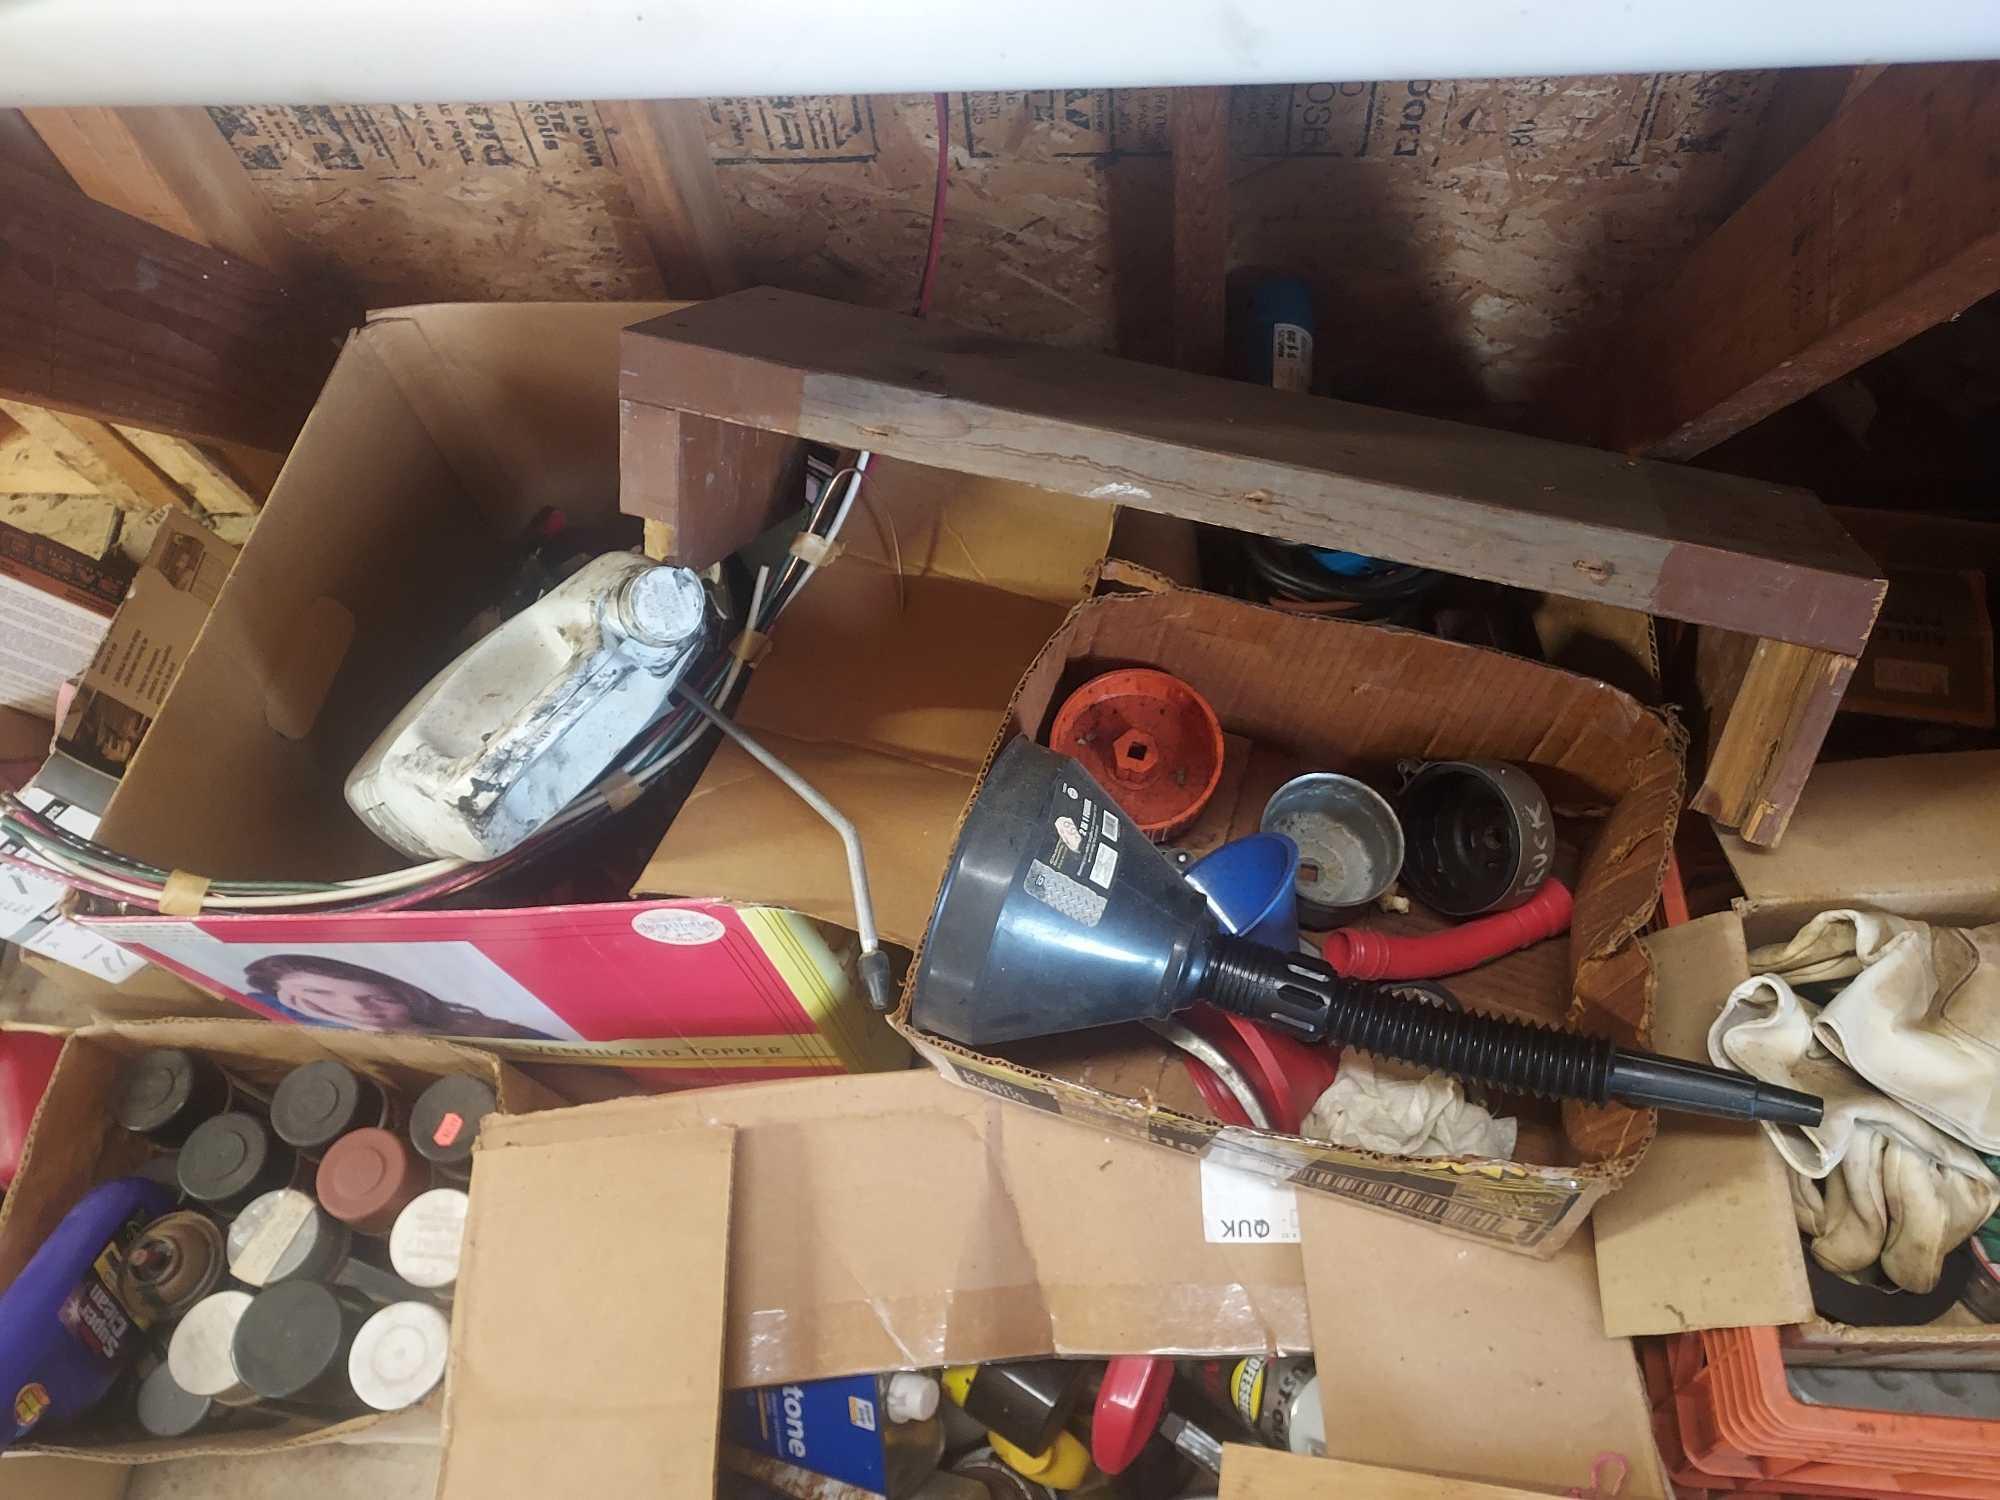 Contents On & Below Workbench - Sprays, Oils, Metal Pieces, Hardware, & more